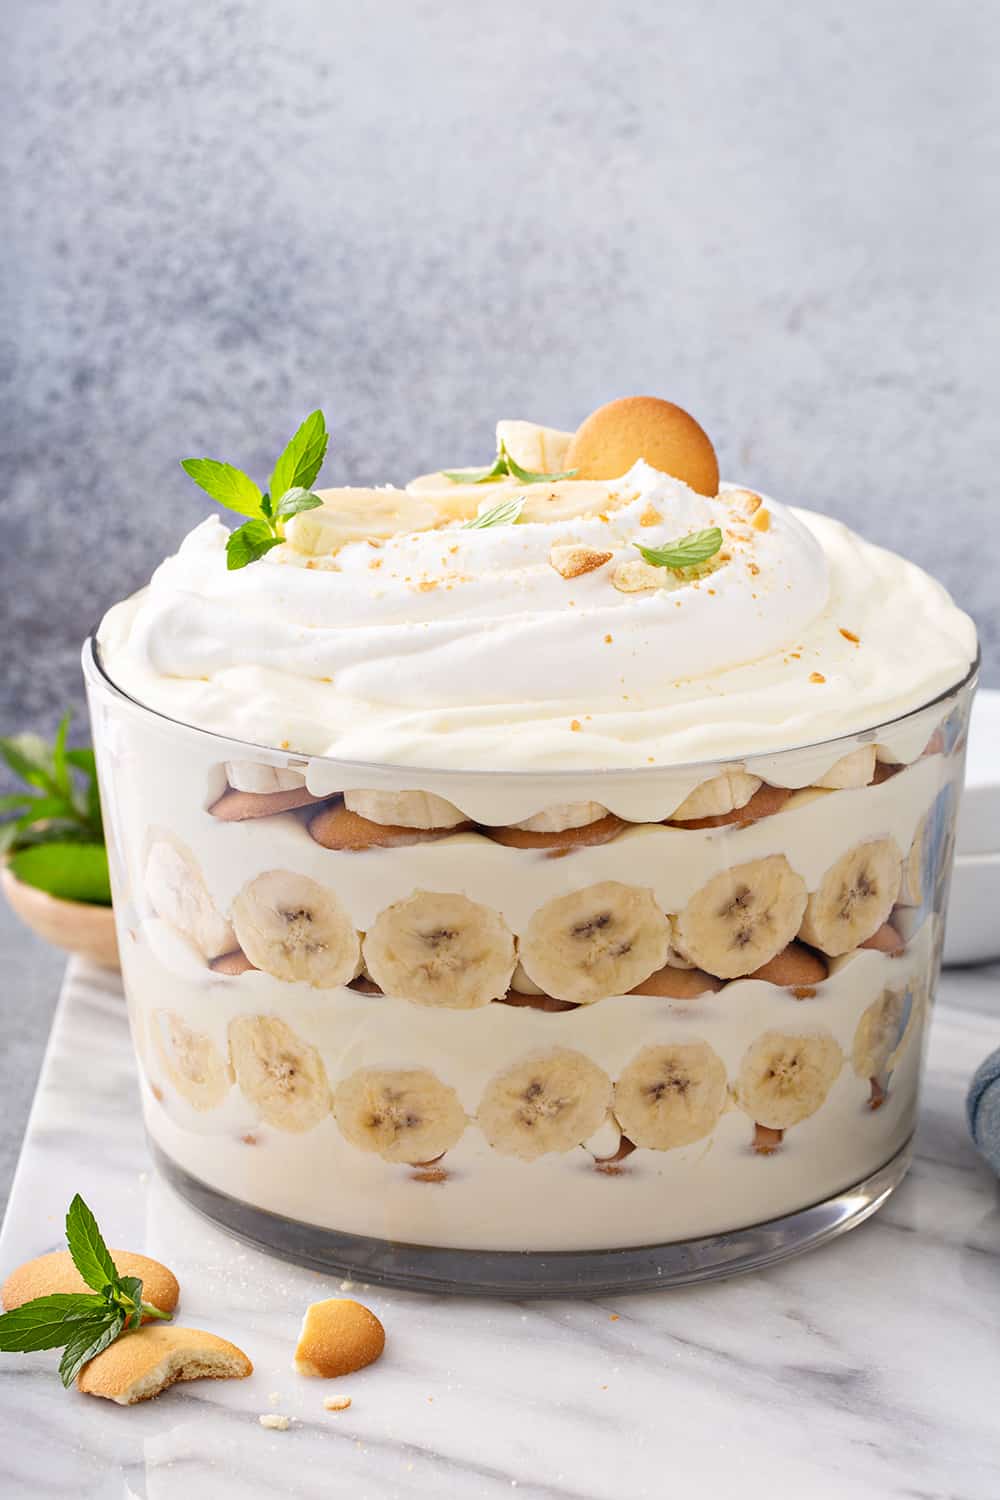 Why is Magnolia Bakery banana pudding famous?